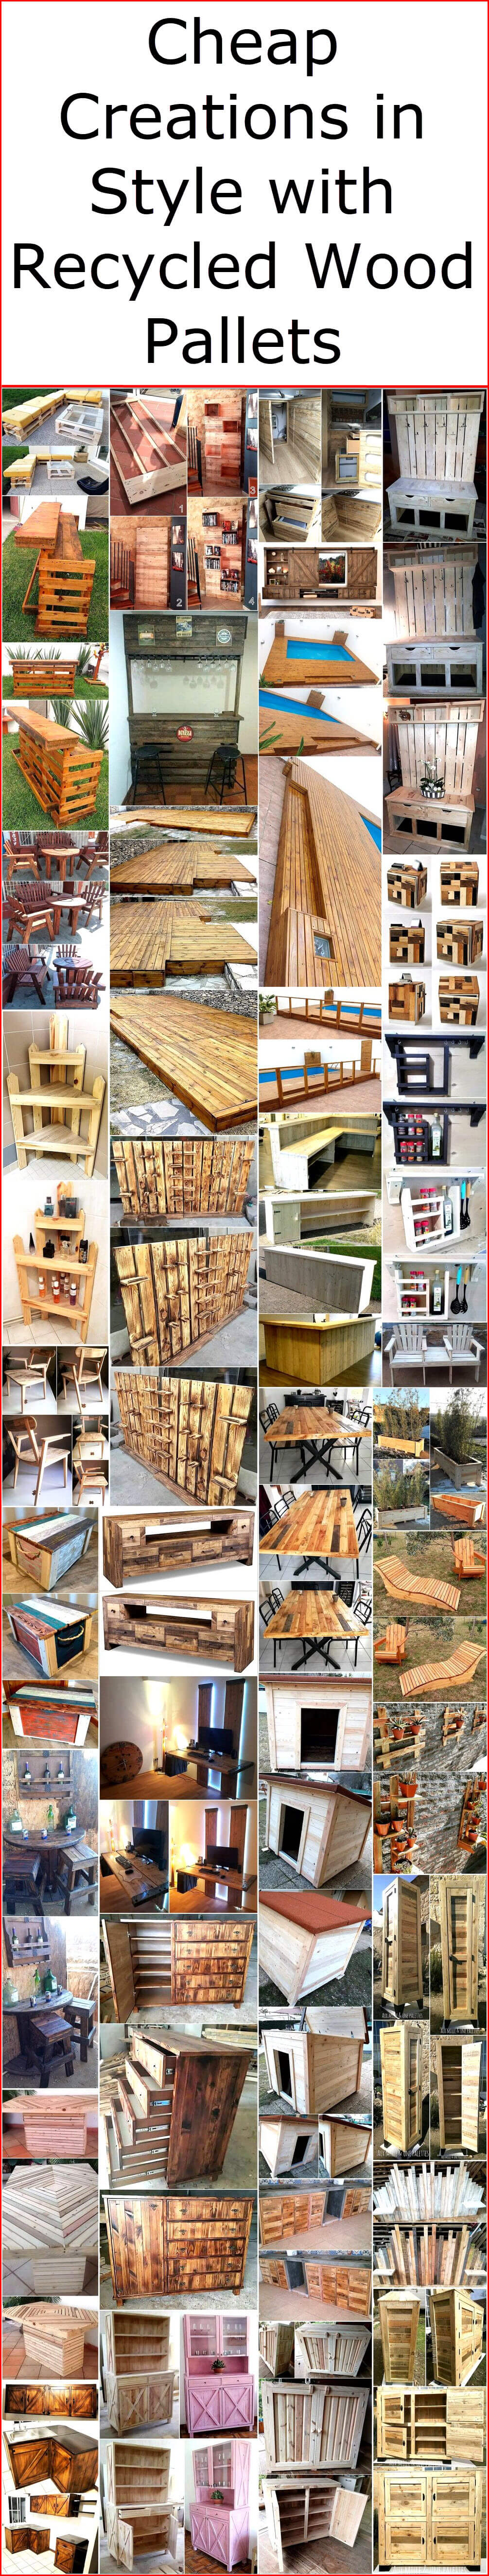 Cheap Creations in Style with Recycled Wood Pallets